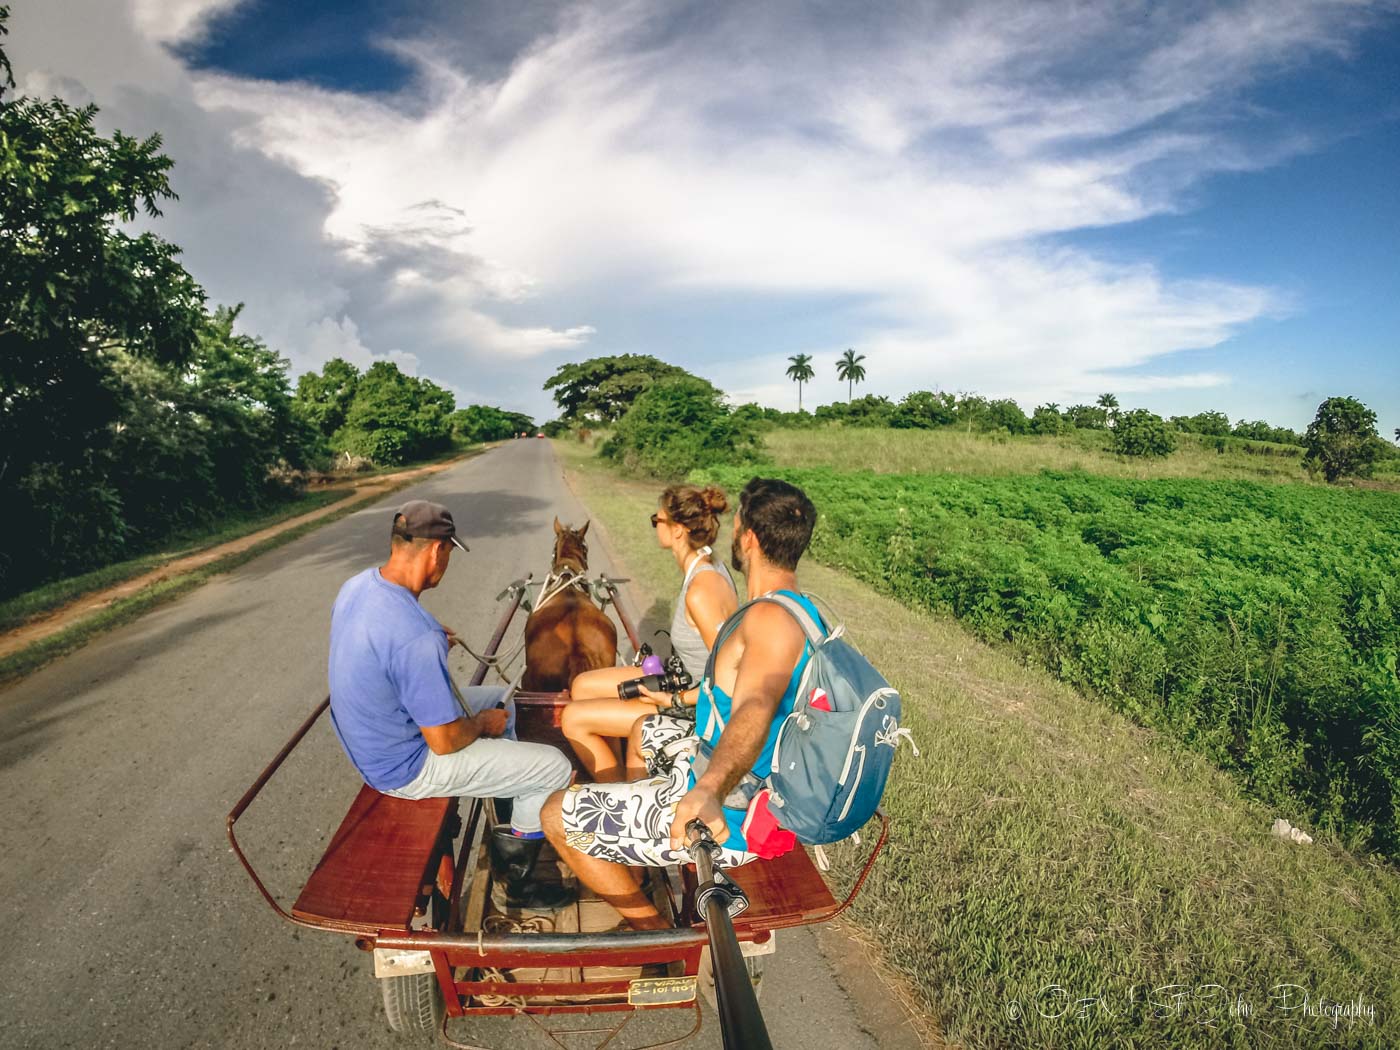 Hitching a ride with a local in Vinales, Cuba